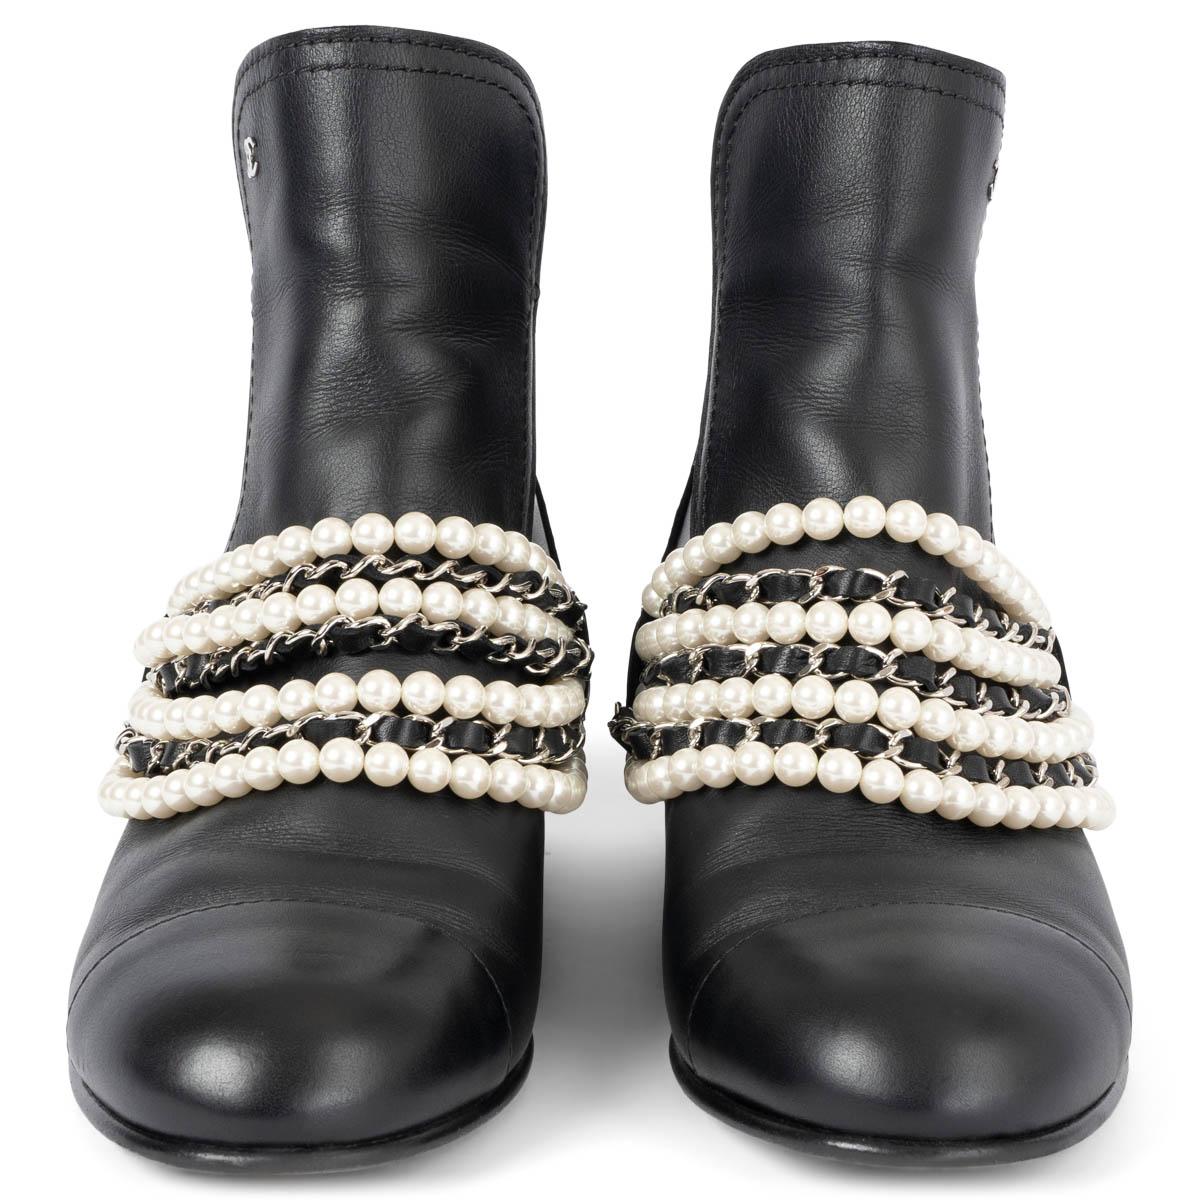 100% authentic Chanel chelsea ankle boots in black smooth calfskin embellished with detachable pearl chain. The design features classic tonal cap toe and a zipper on the heel. Have been worn and are in excellent condition. 

2017 Paris-Greece